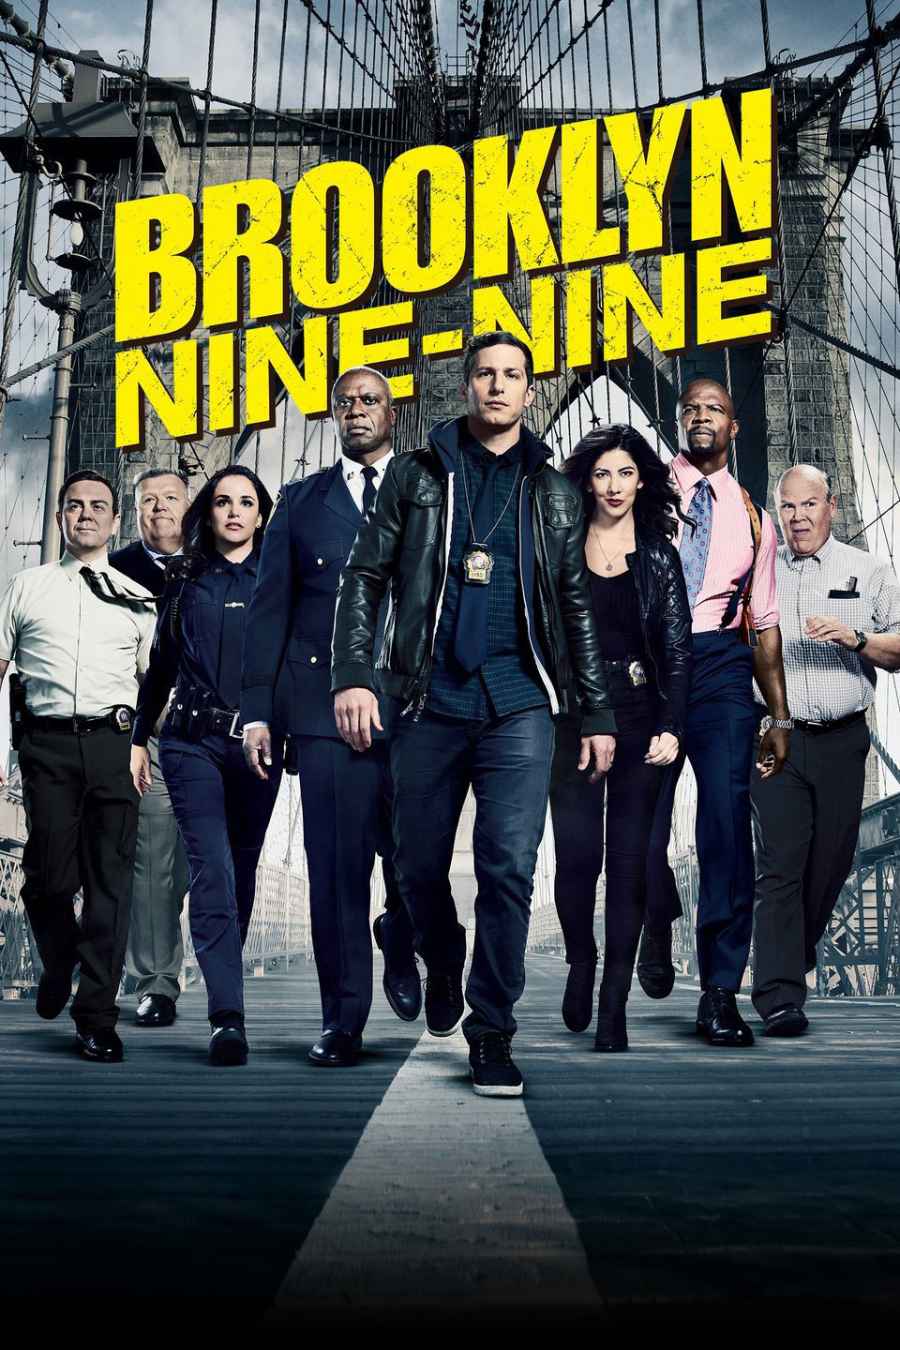 Brooklyn Nine-Nine What to Watch This Week While Social Distancing April 23